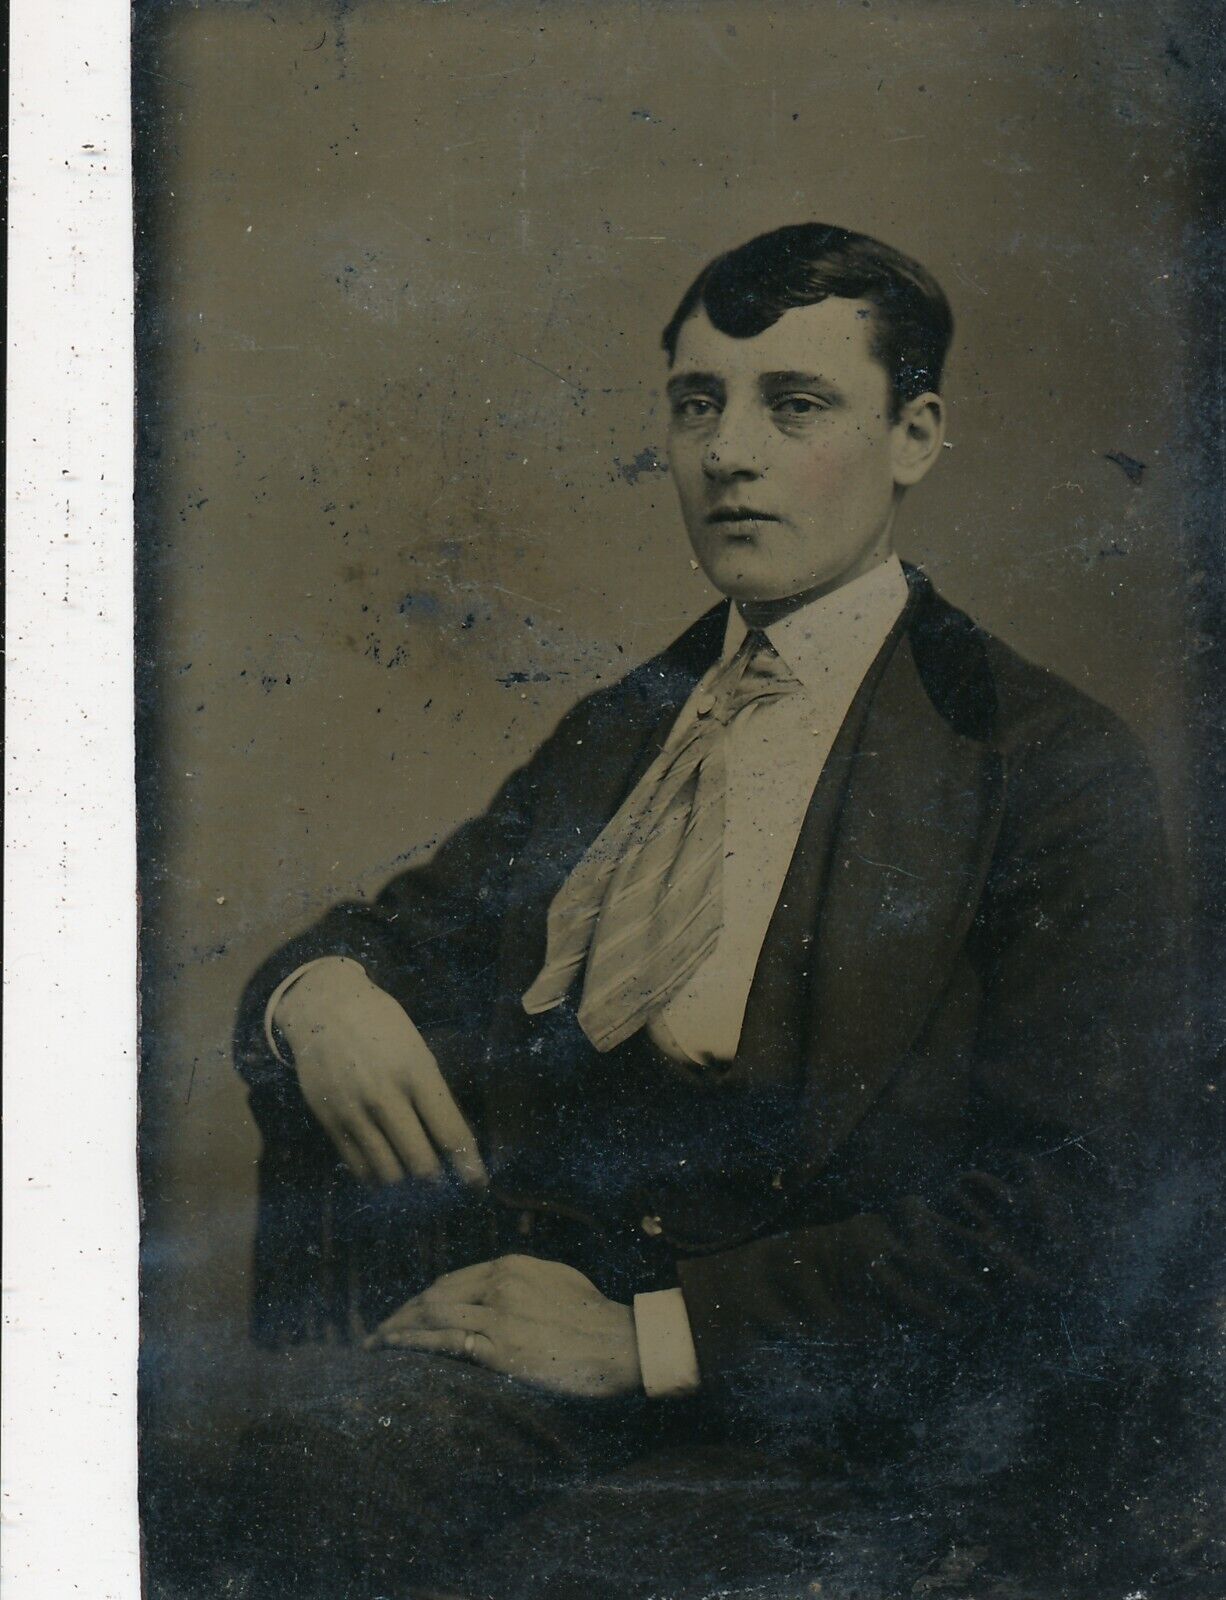 Seated Young Man With Tie Untied 1870\'s Tintype